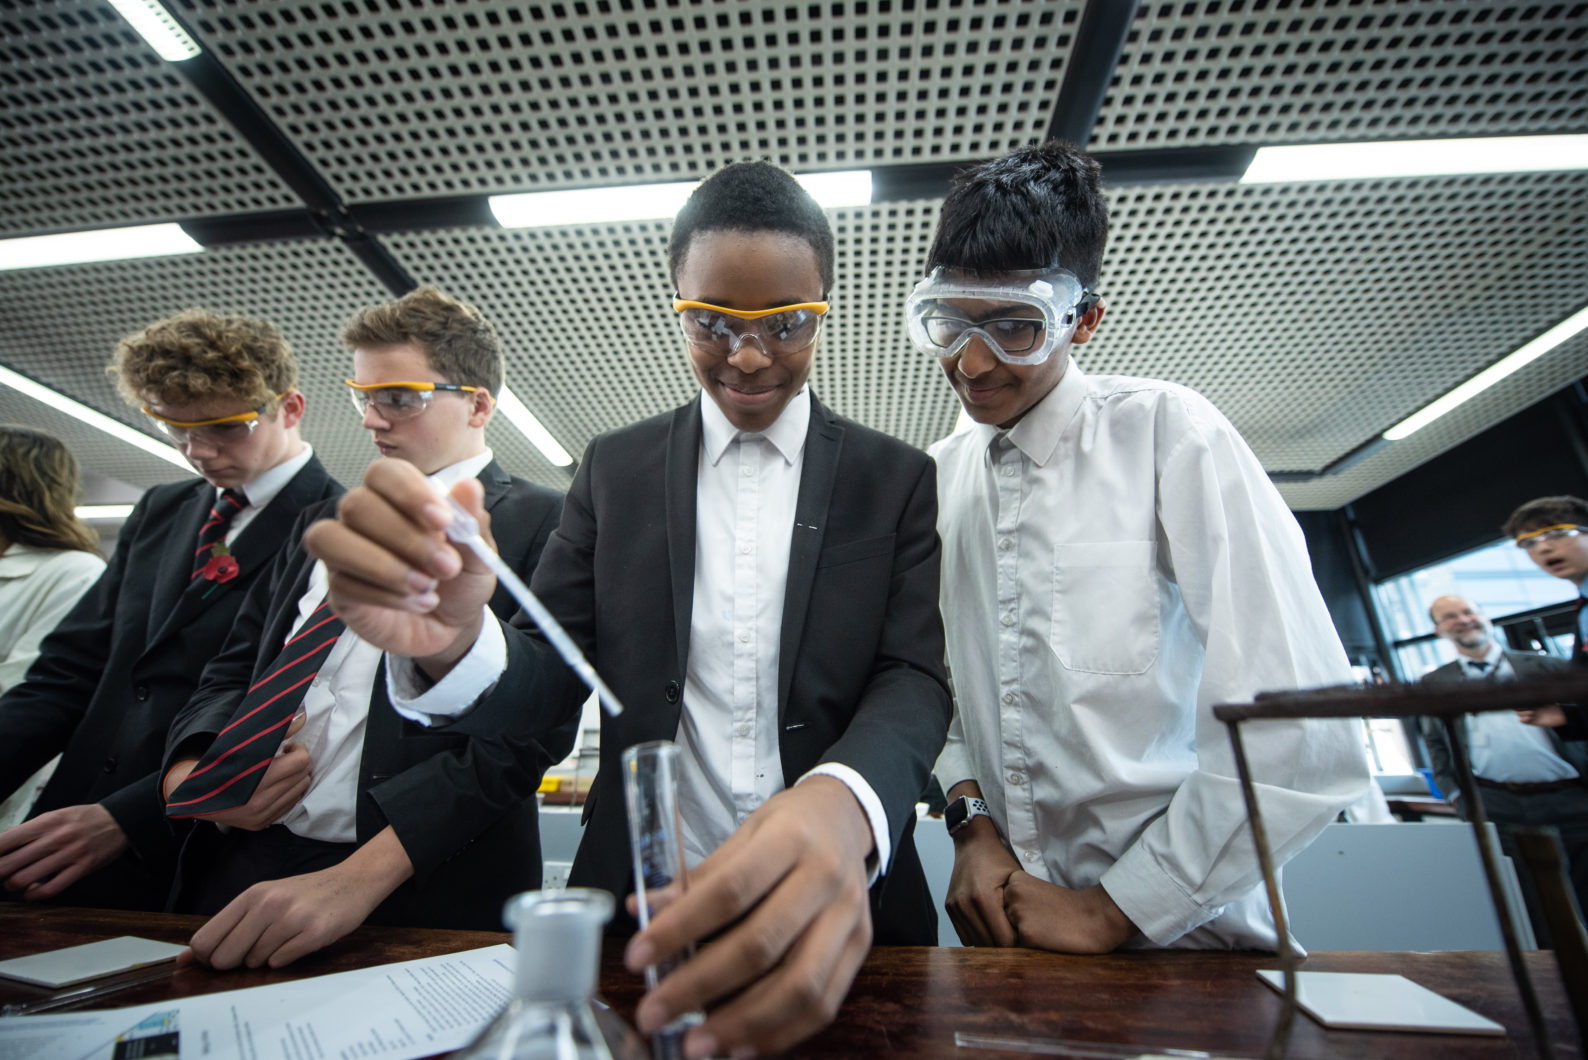 Pupils studying Chemistry at Magdalen College School